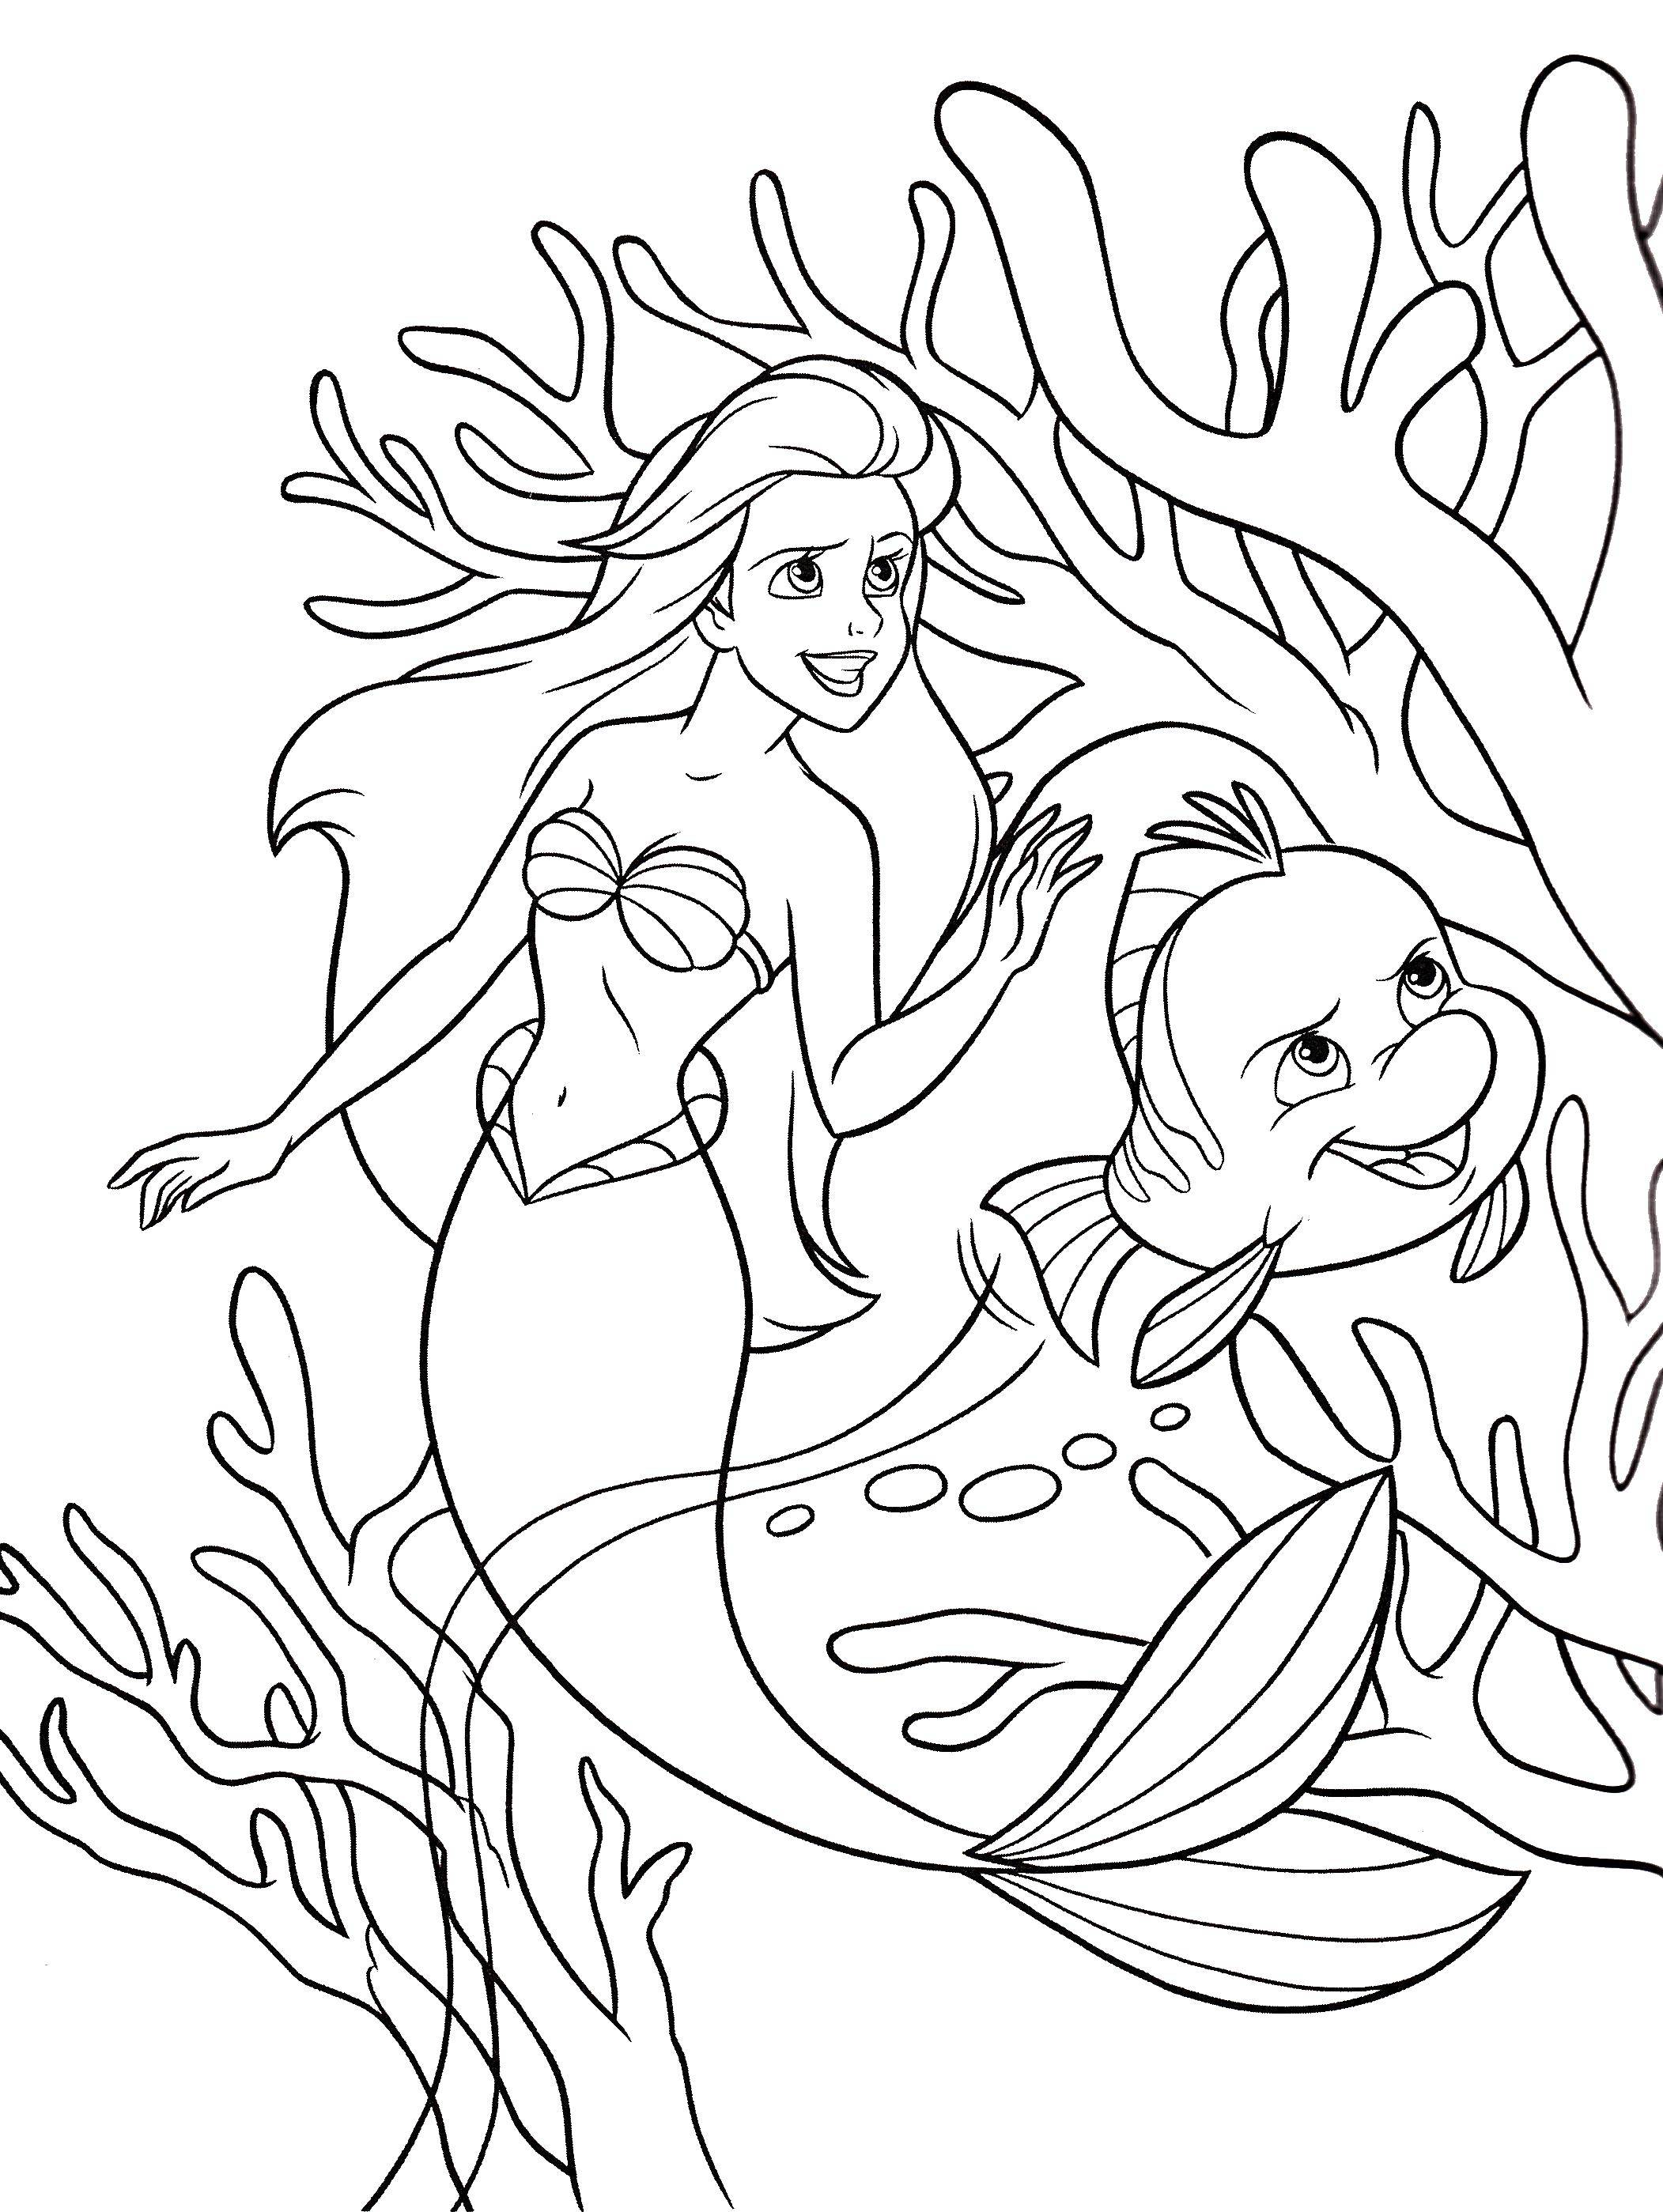 Coloring Crafty friends. Category The little mermaid. Tags:  Disney, the little mermaid, Ariel.